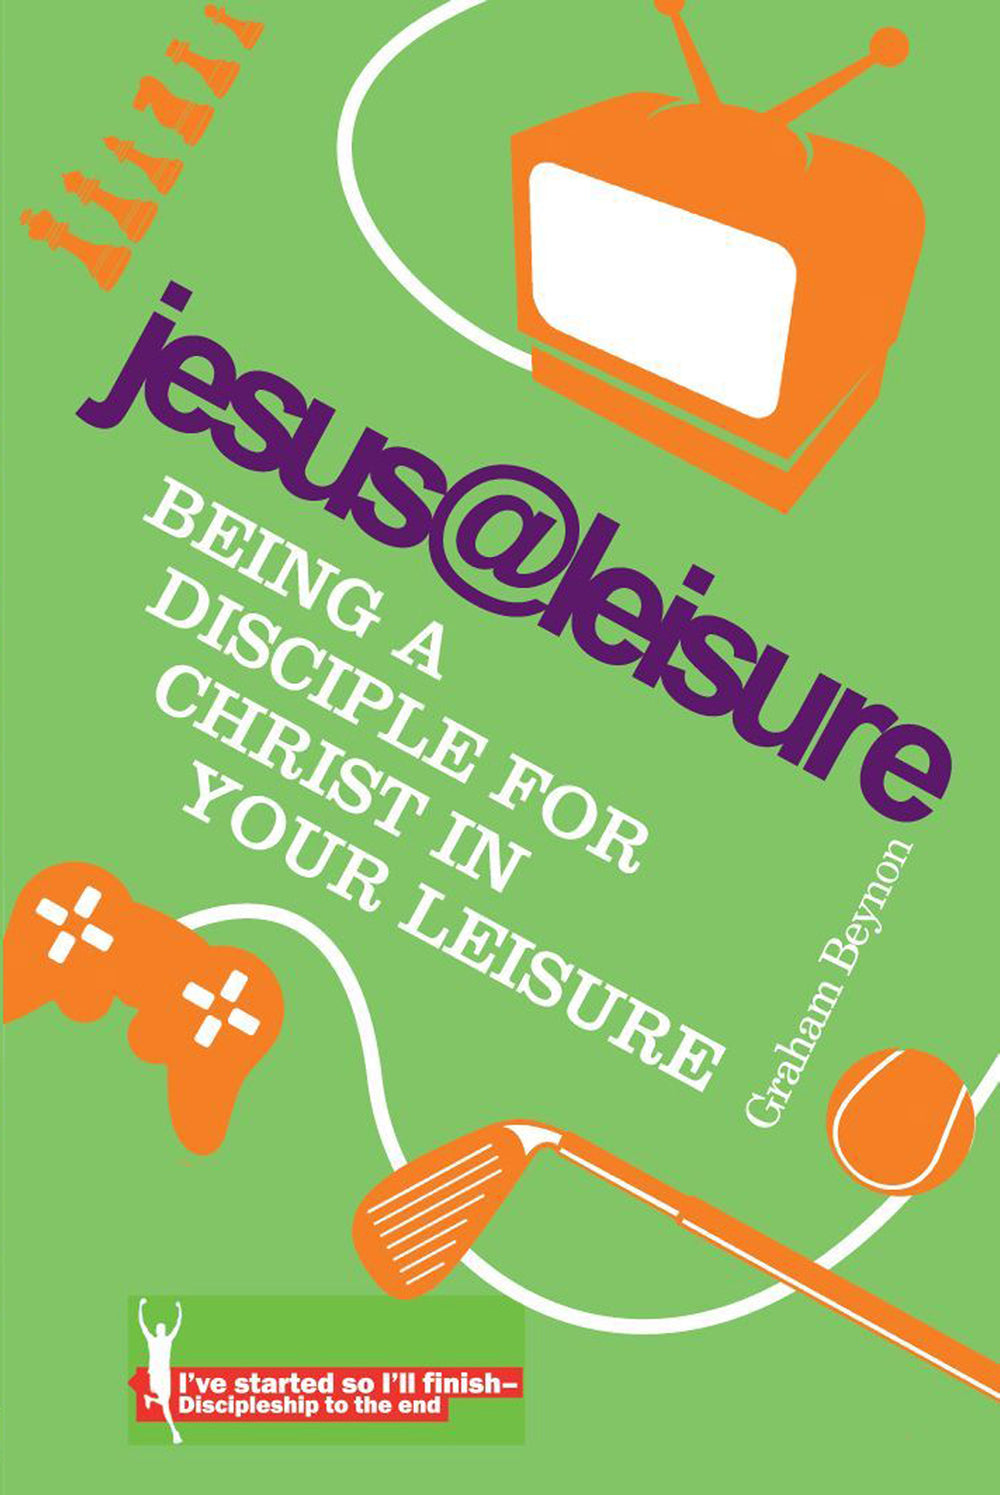 Image of Jesus@leisure other